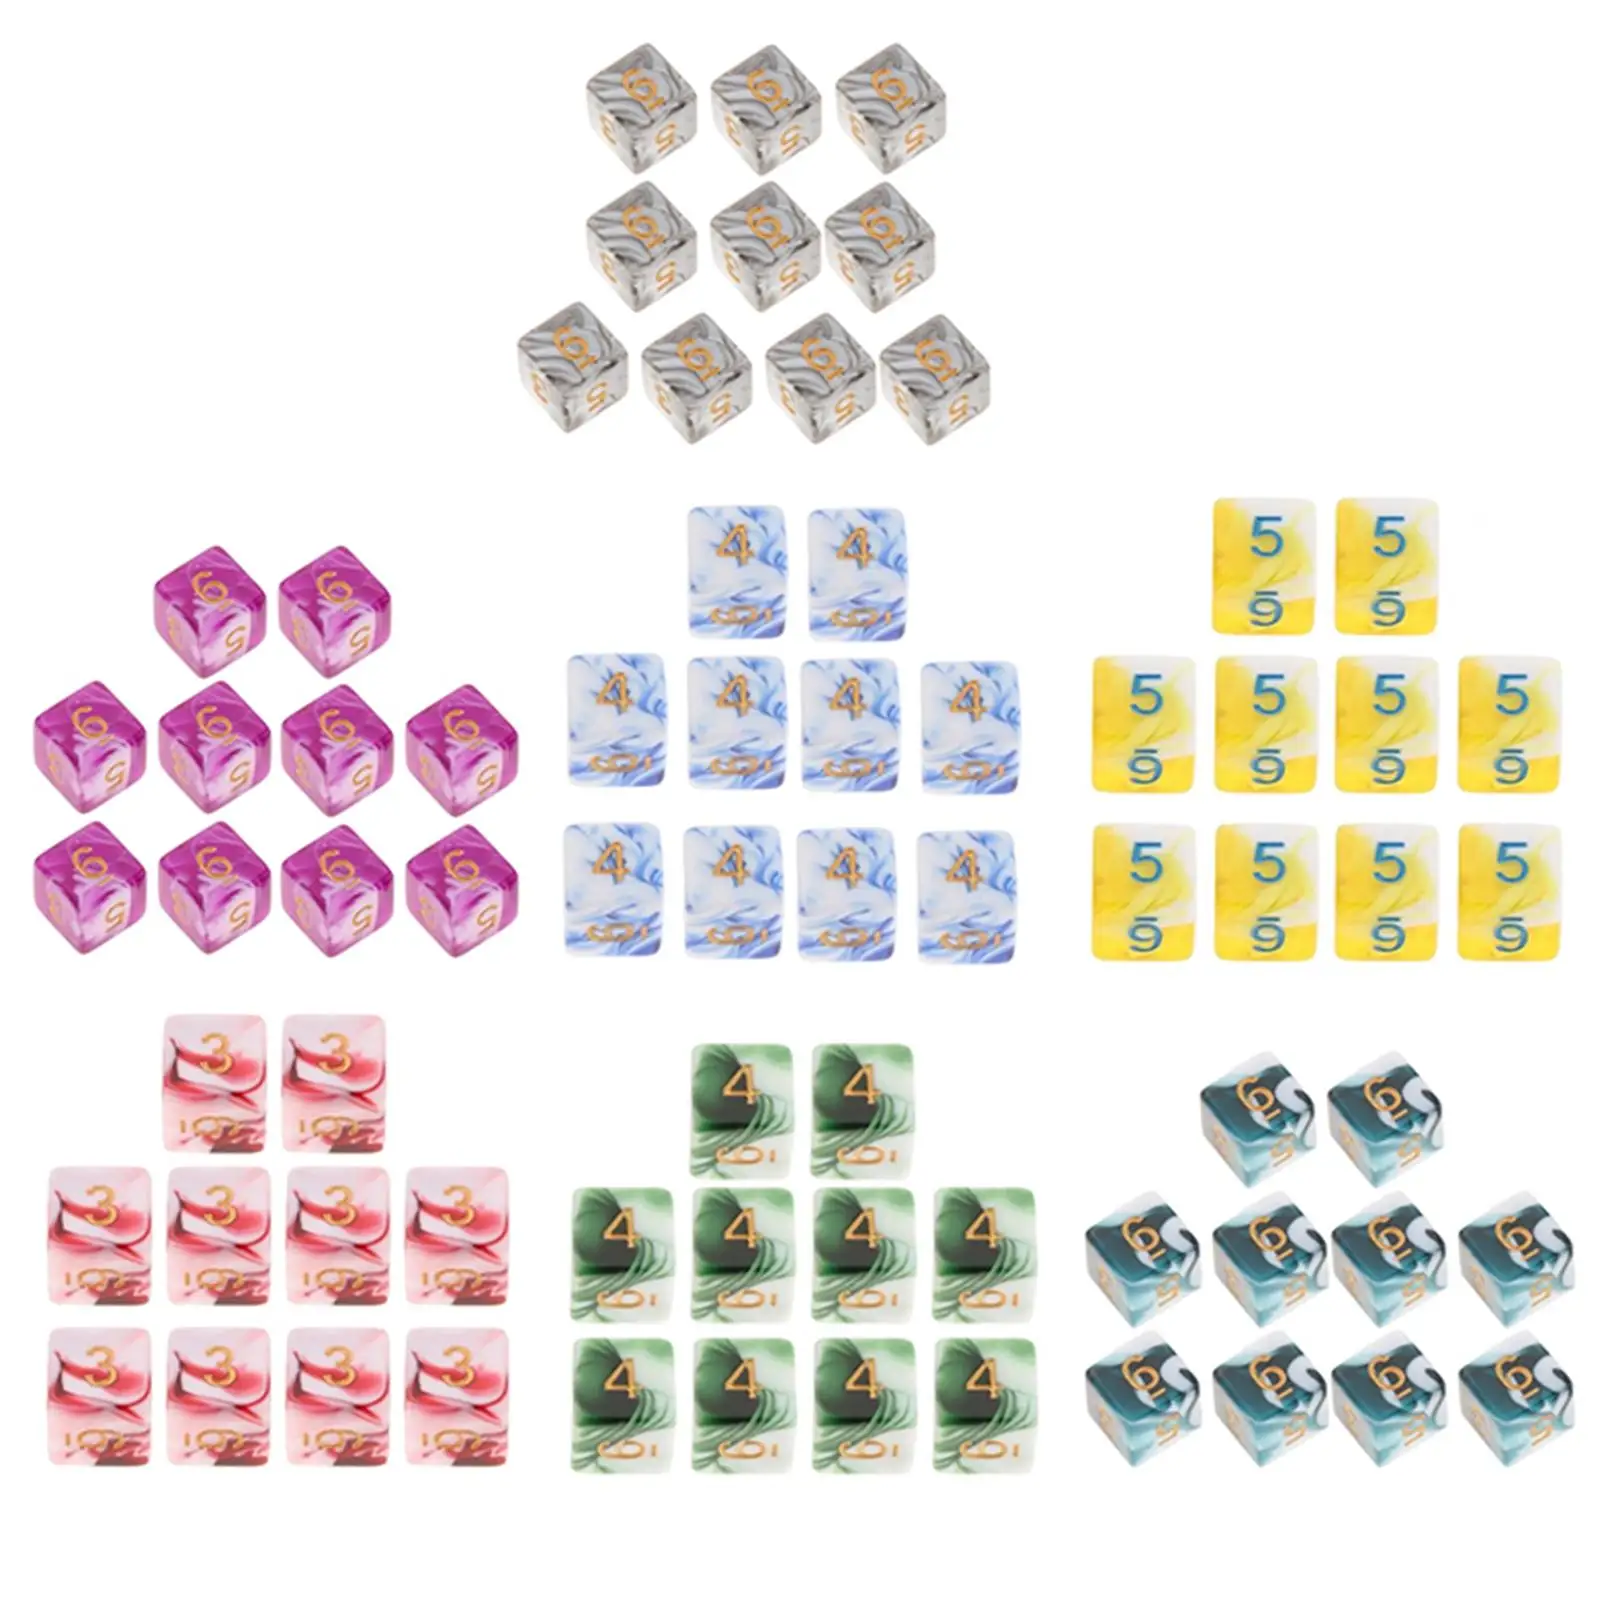 10 Pieces 6 Sides Dice Entertainment Toys Math Teaching Aids Game Dice for Board Party Roll Playing Table Game